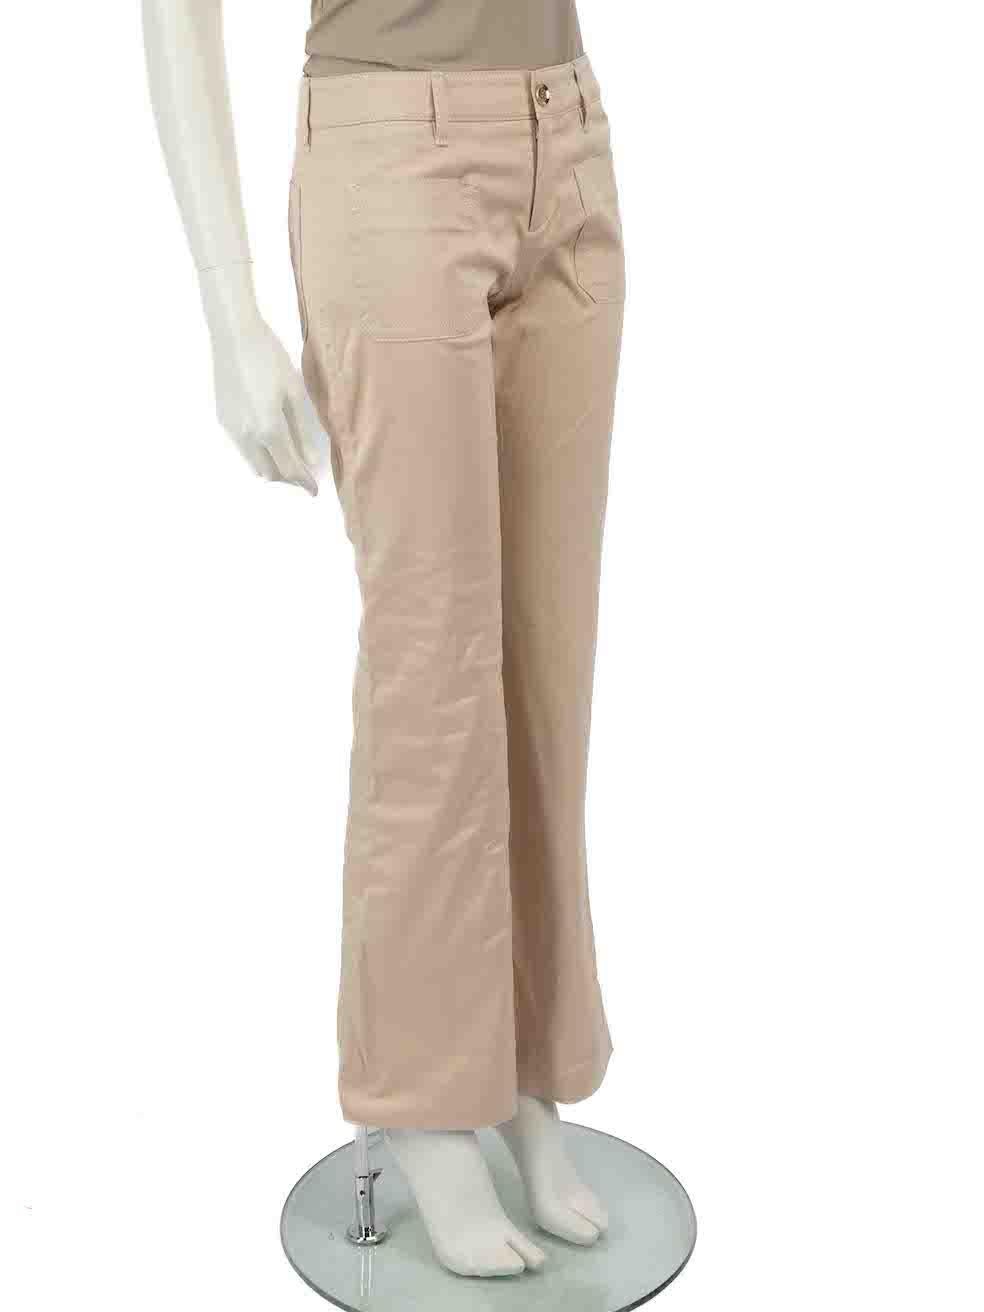 CONDITION is Very good. Hardly any visible wear to trousers is evident on this used Gucci designer resale item.
 
 
 
 Details
 
 
 Beige
 
 Cotton
 
 Straight leg trousers
 
 Low rise
 
 Front zip closure with buttons
 
 Belt hoops
 
 2x Front side